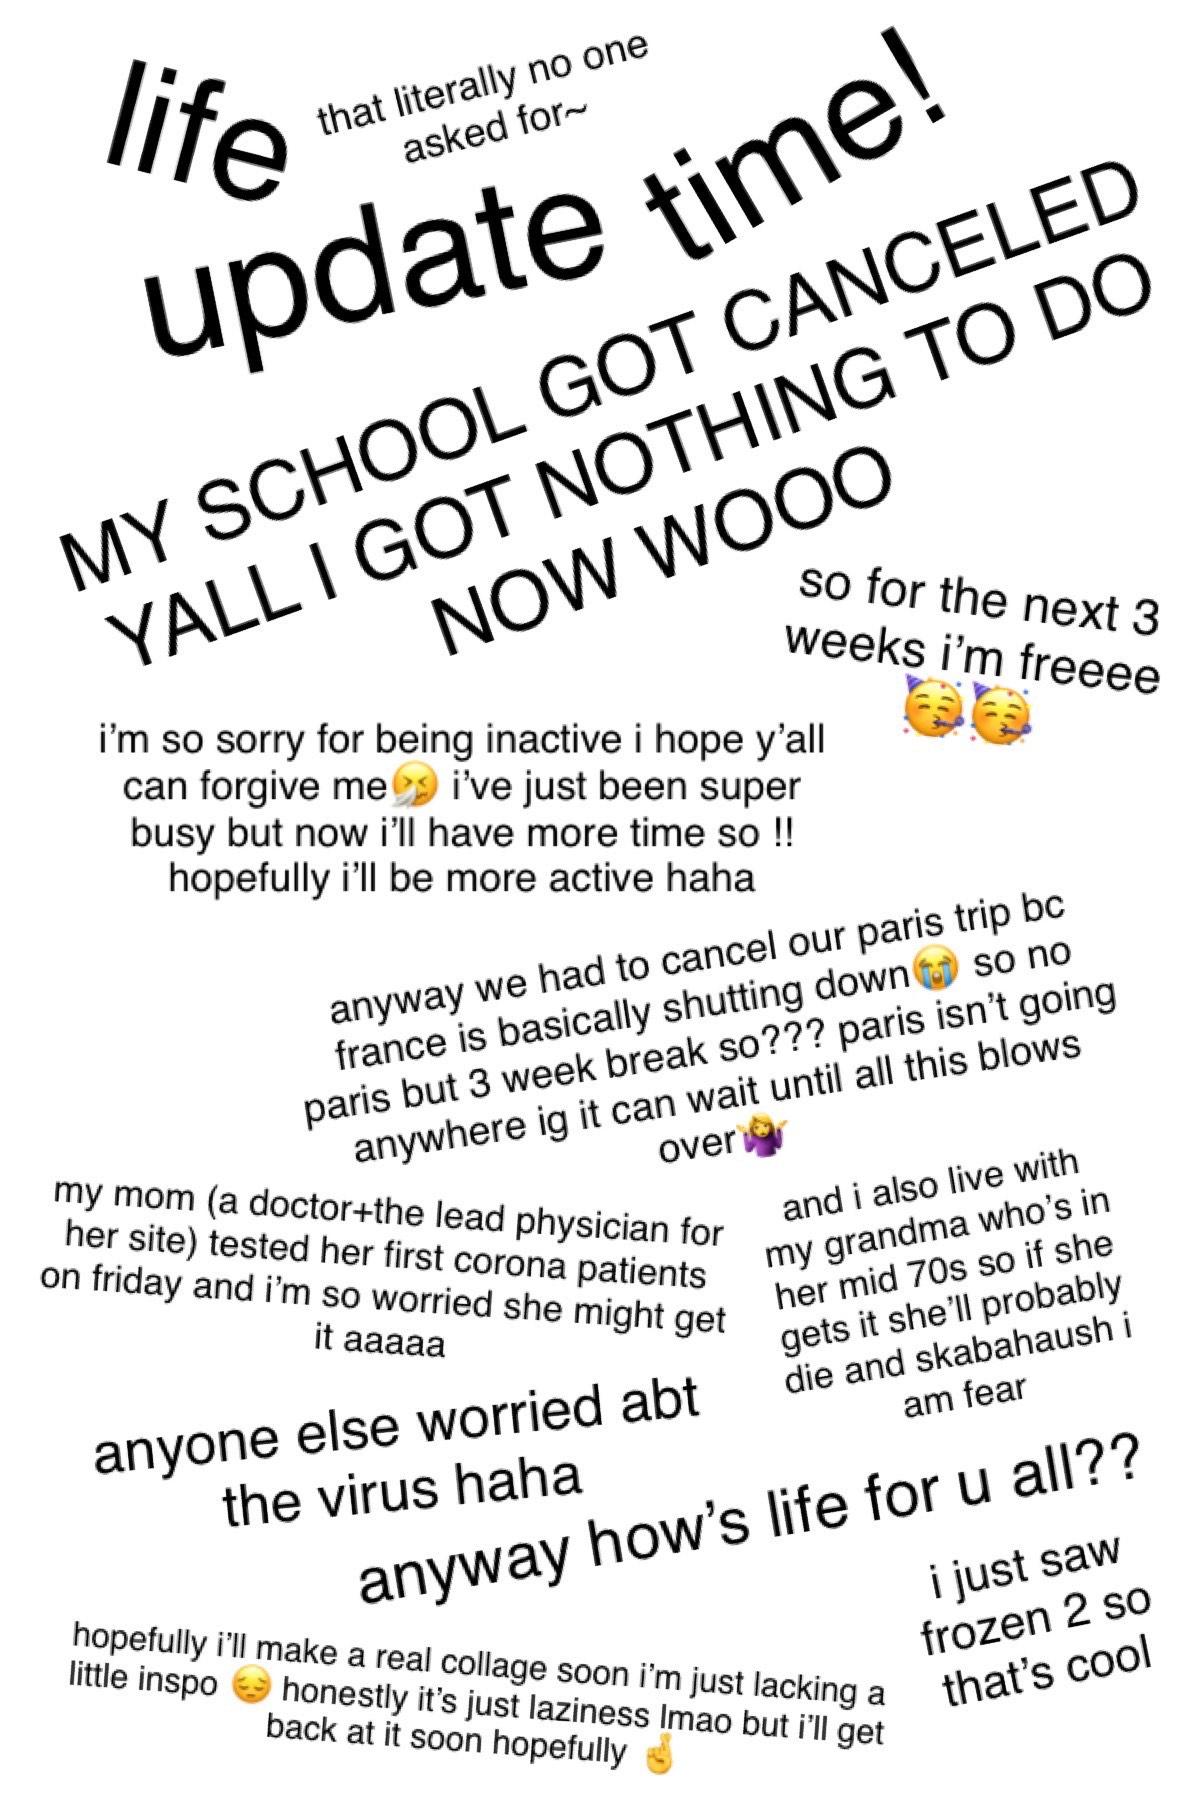 wOo life update tiMe-
how is everyone?? i’ve been kinda inactive sorry🥴 this whole corona thing is kinda crazy, stay safe guys🤧 
QOTD: has your school been canceled?
AOTD: clearly lol, 3 weeks of freedom here i cOME🥳🥳